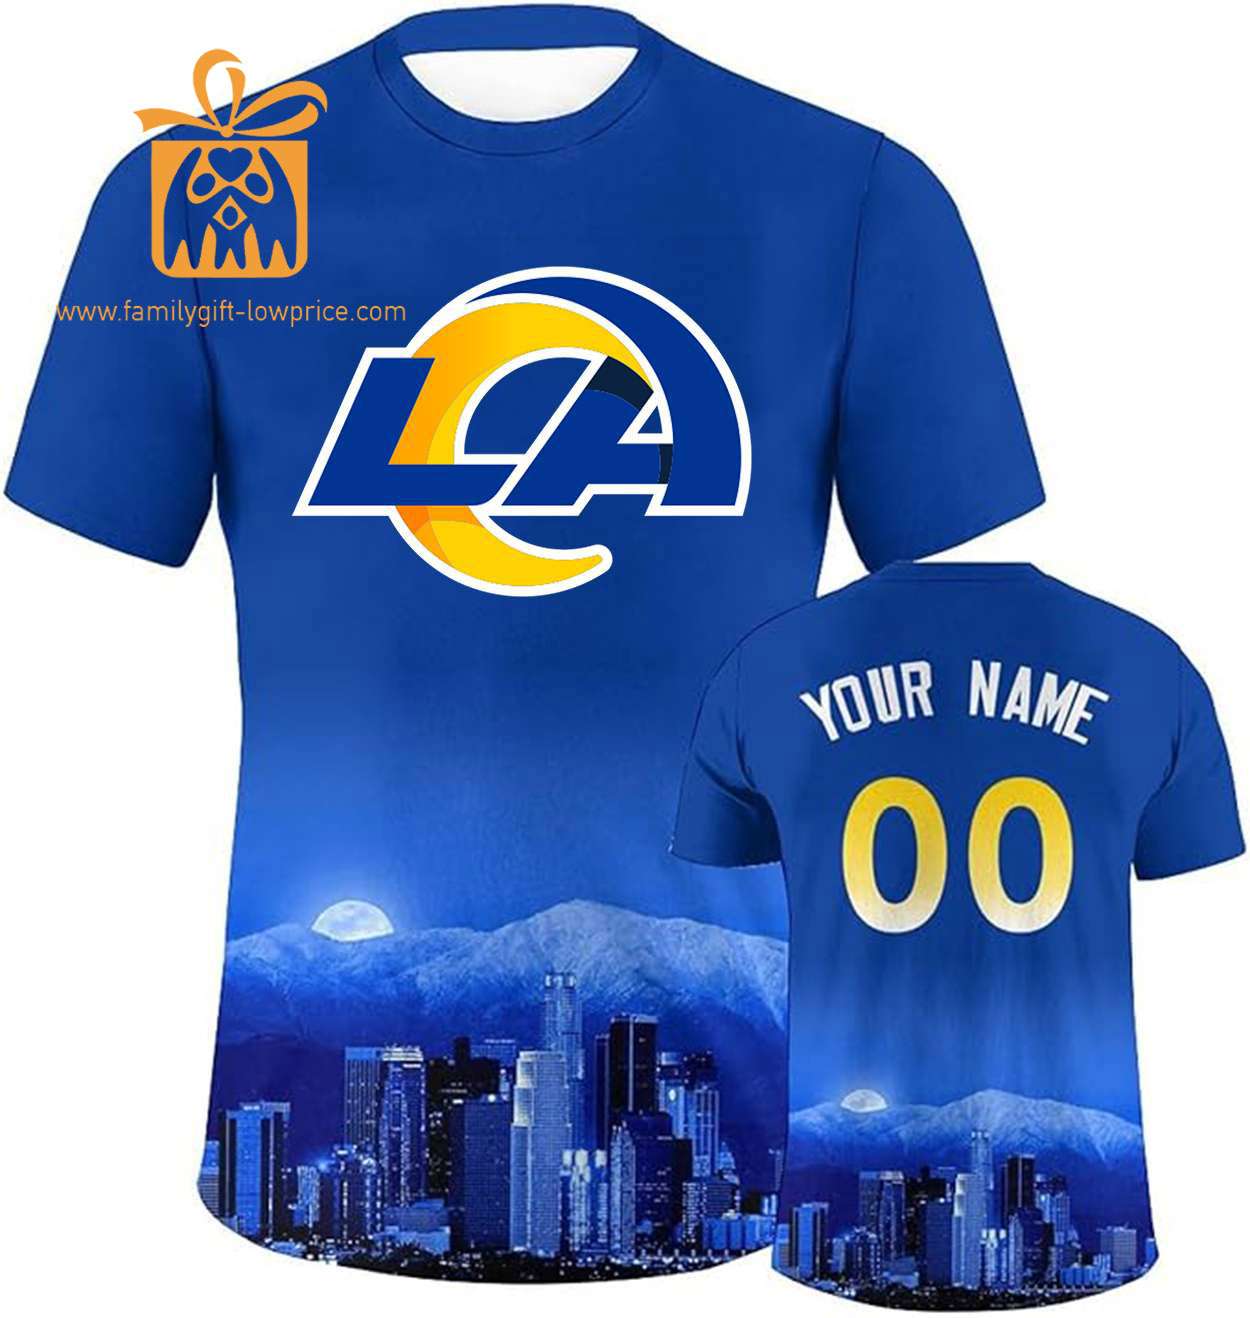 Los Angeles Rams Custom Football Shirts – Personalized Name & Number, Ideal for Fans